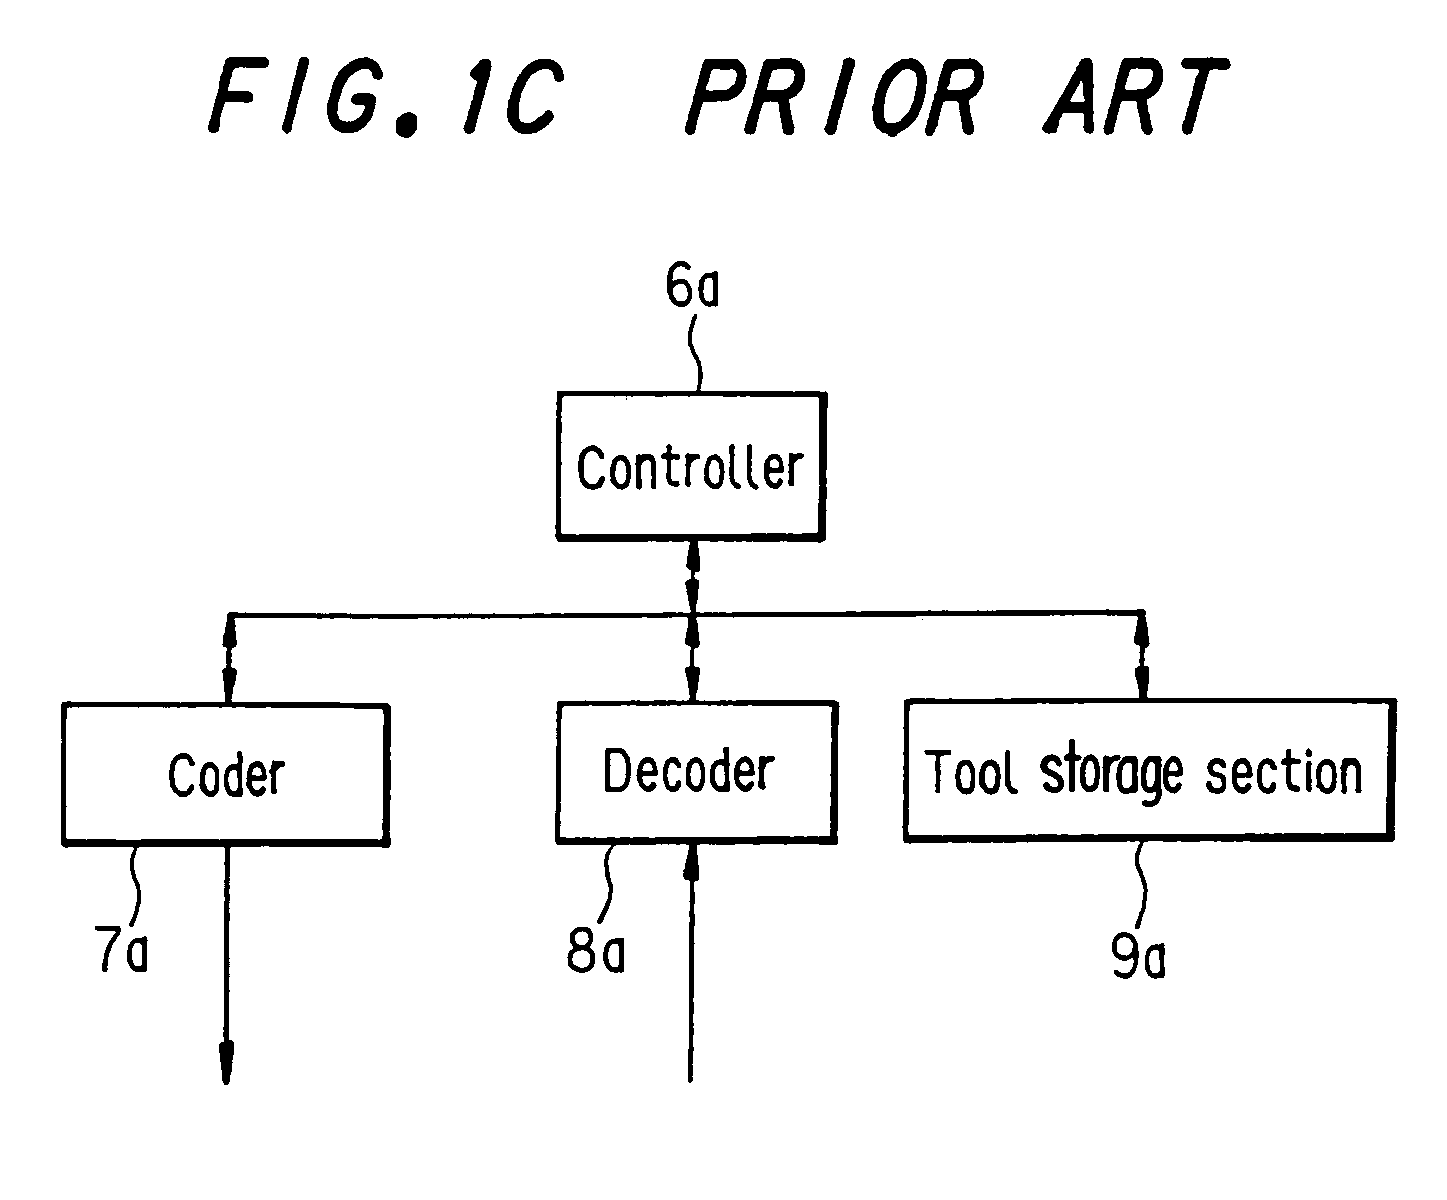 Decoding apparatus using tool information for constructing a decoding algorithm